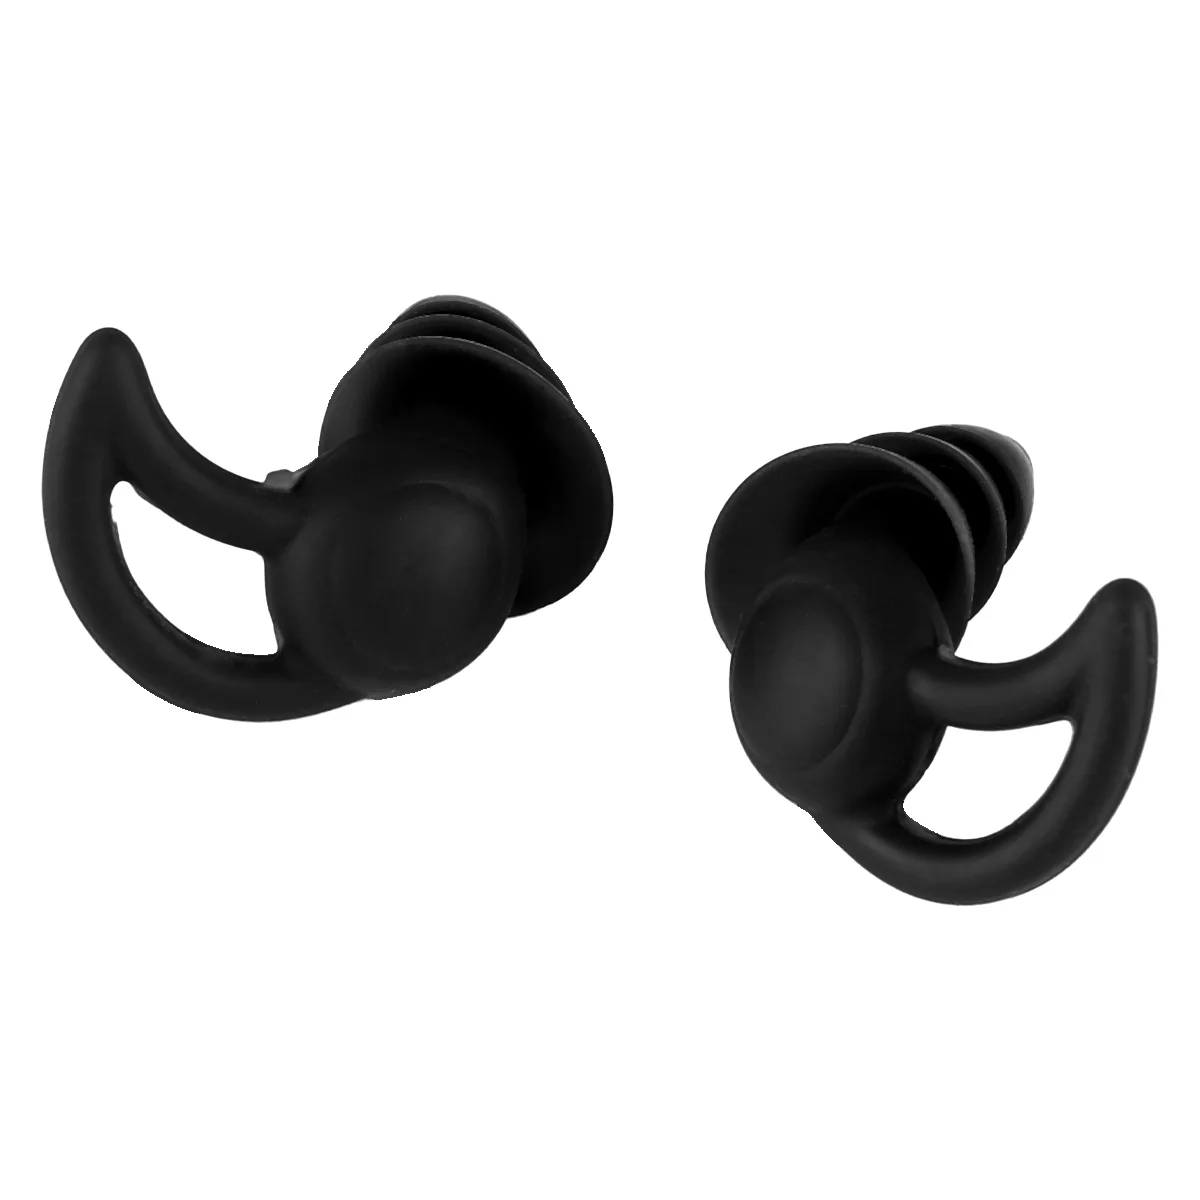 

Soundproof Earplugs Noise Cancelling Earbuds Reduction Blocking Airplanes Outdoor Reusable Sleeping Silica Gel Anti-Noise Child